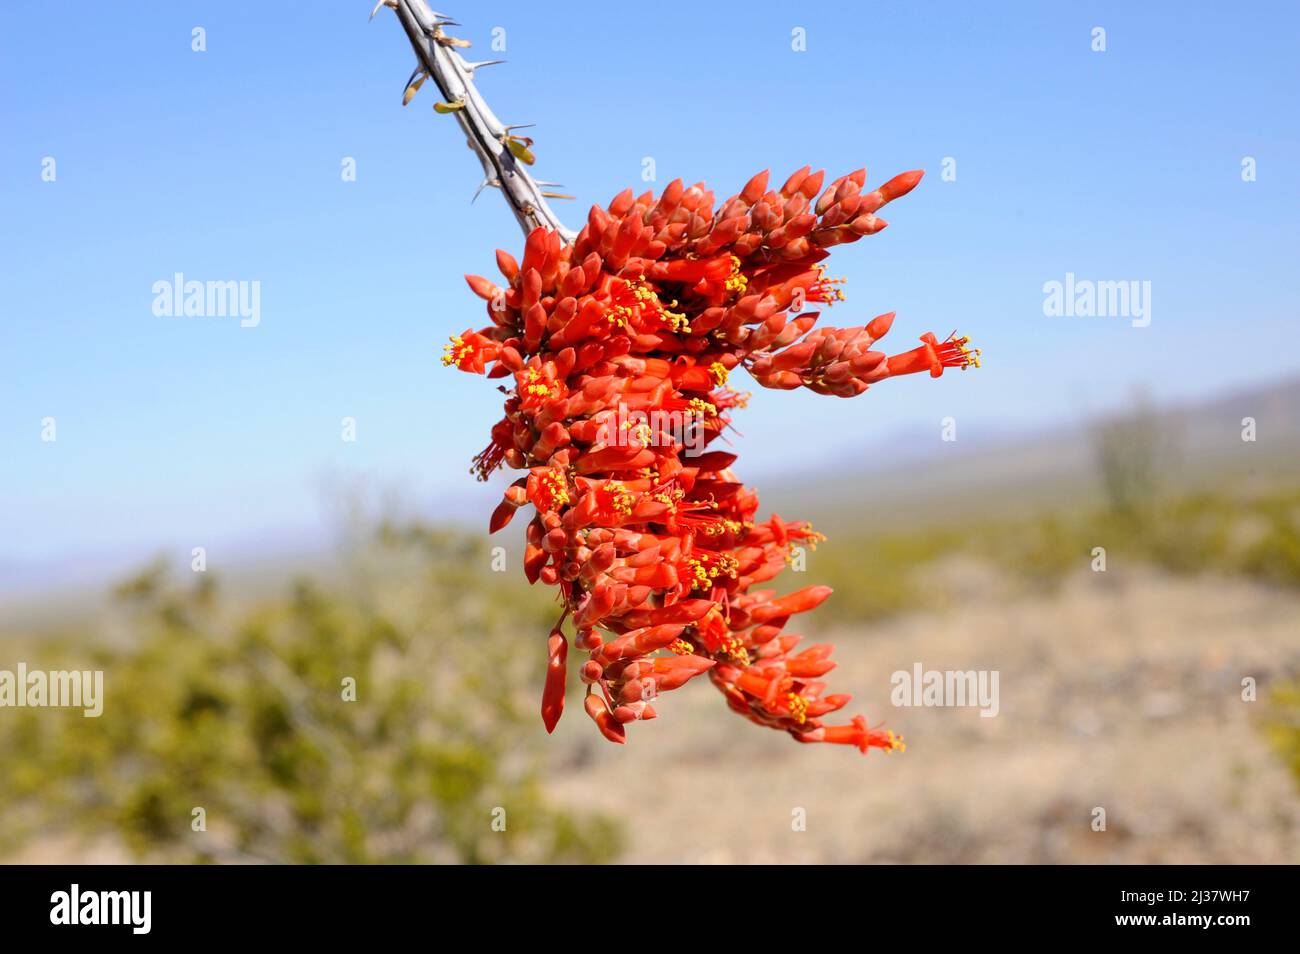 Ocotillo or coachwhip (Fouquieria splendens) is a spiny shrub native to deserts of southwestern USA and northern Mexico. Flowers detail. This photo Stock Photo